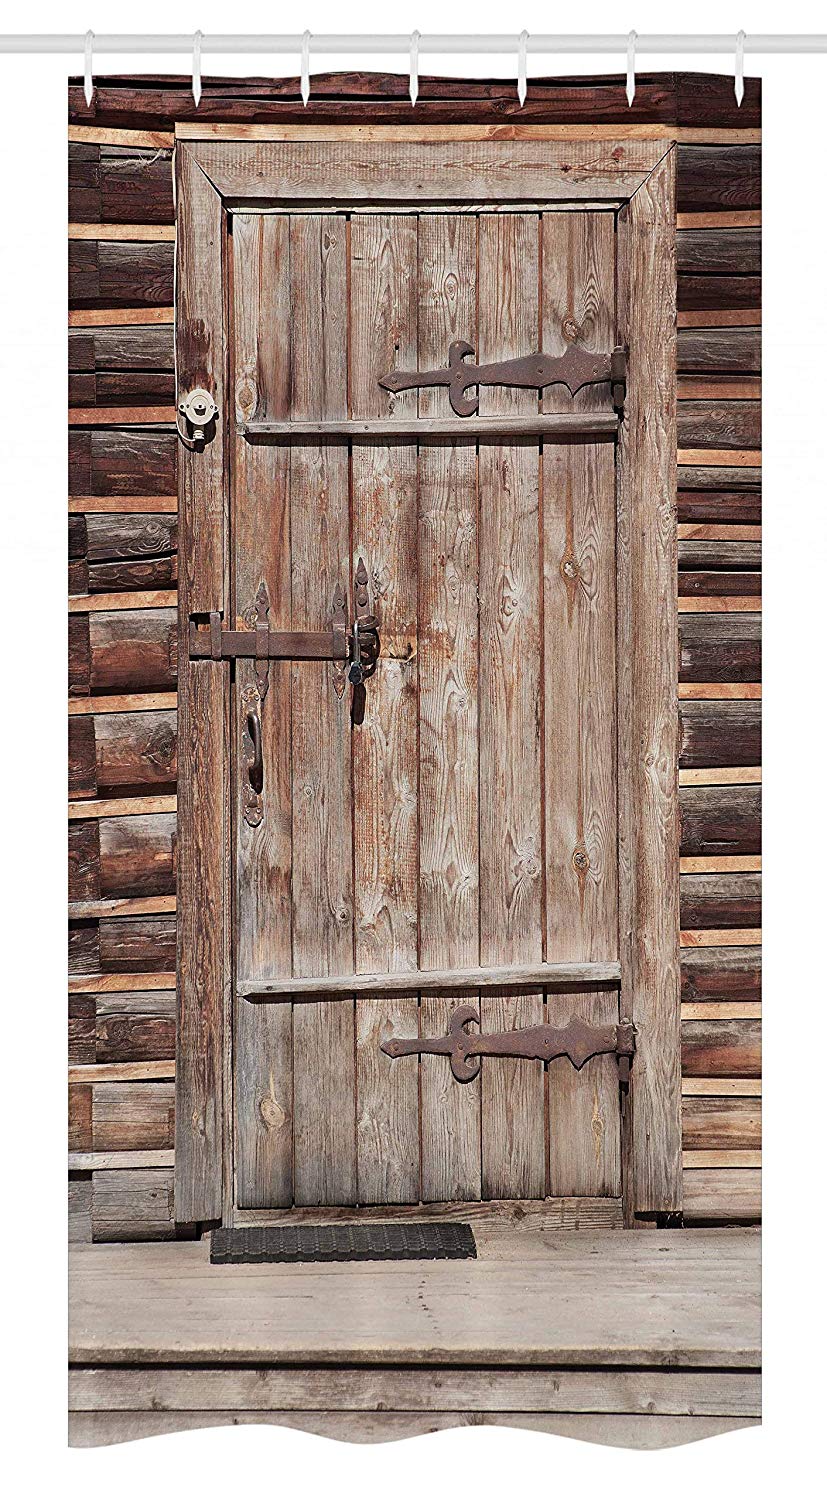 Ambesonne Rustic Stall Shower Curtain, Timber Rustic Door in Wall of an Old Log House Abandoned Building Entrance Gate, Fabric Bathroom Decor Set with Hooks, 36